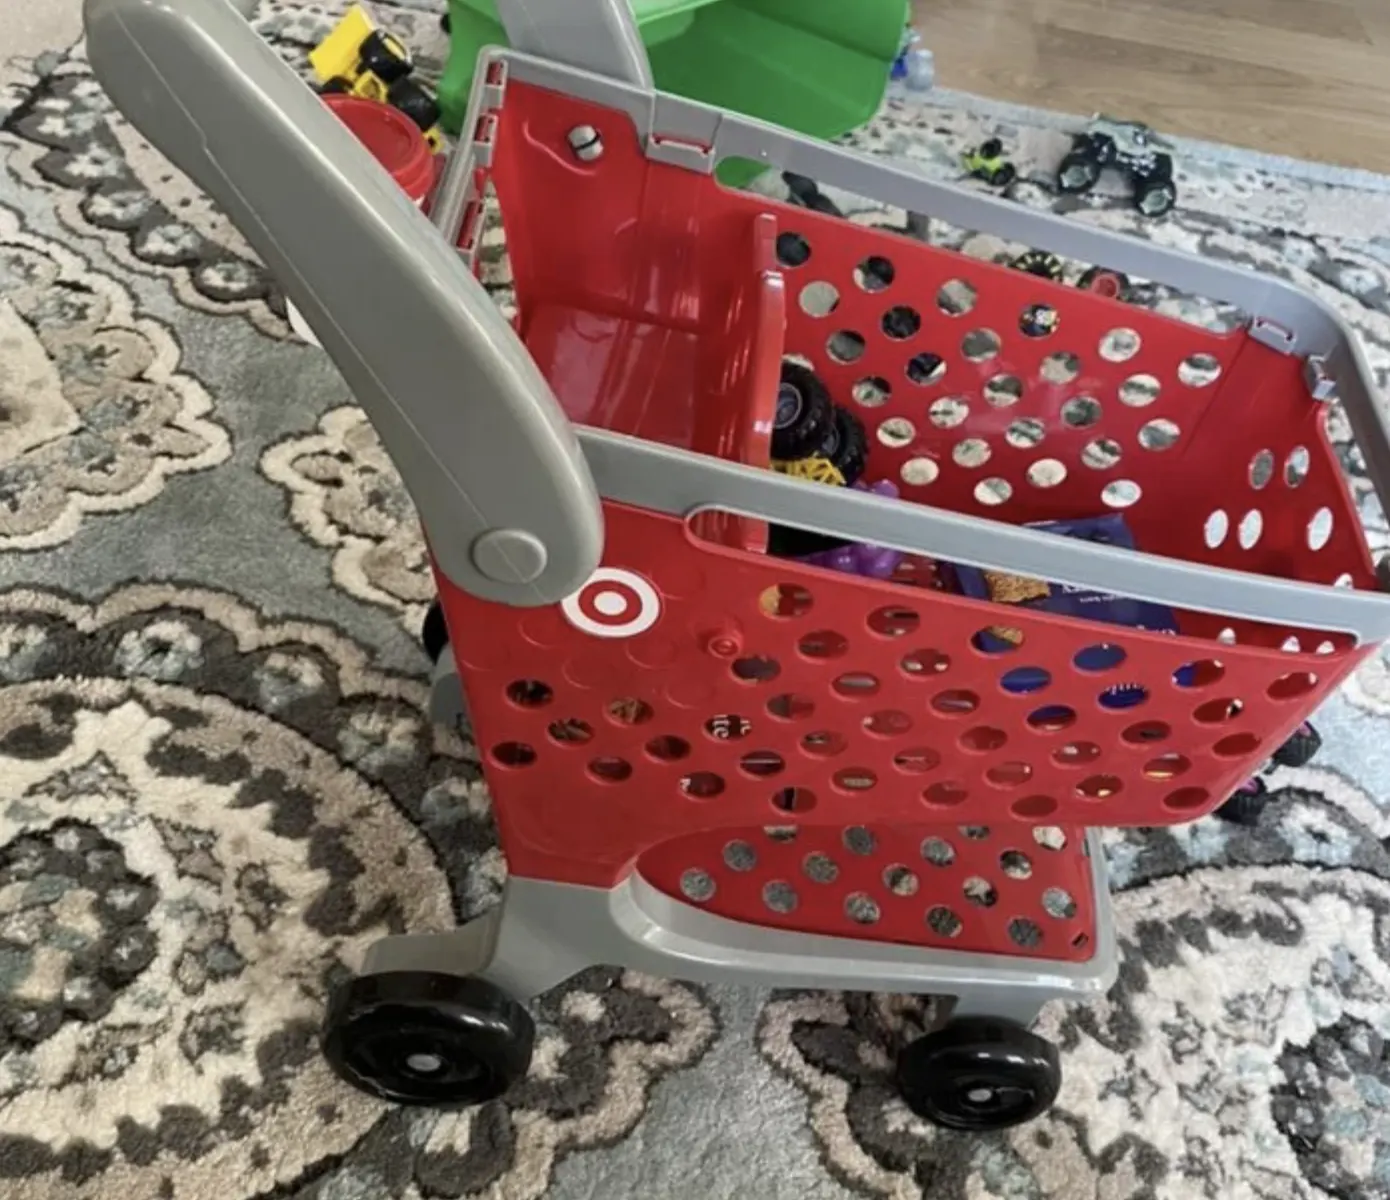 Target Has a New Mini Shopping Cart for Kids That Comes With Groceries and  a Coffee Cup